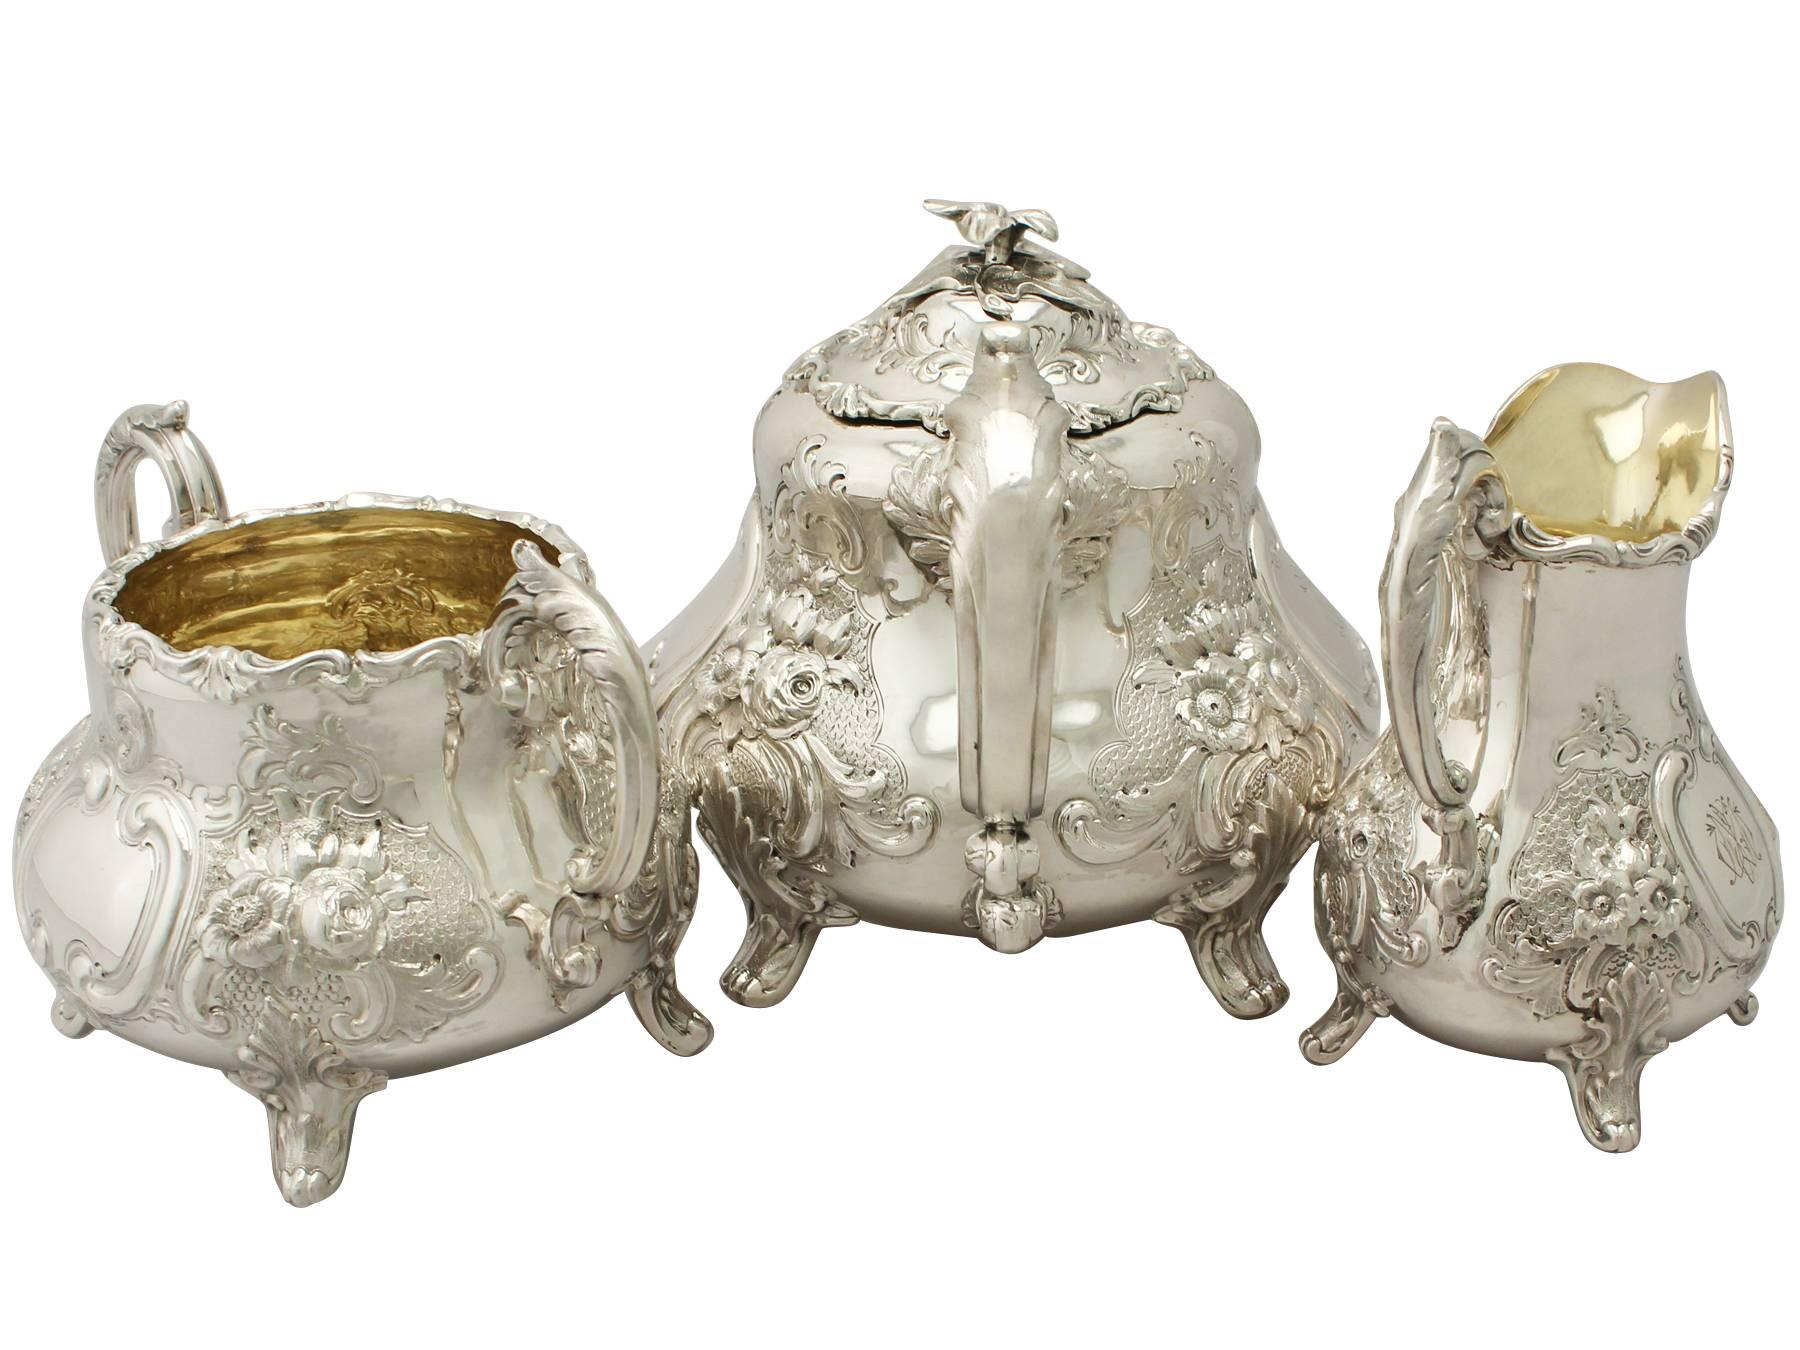 An exceptional, fine and impressive antique Victorian English sterling silver three-piece tea service / tea set; part of our silver teaware collection.

This fine antique Victorian sterling silver three-piece tea service consists of a teapot,